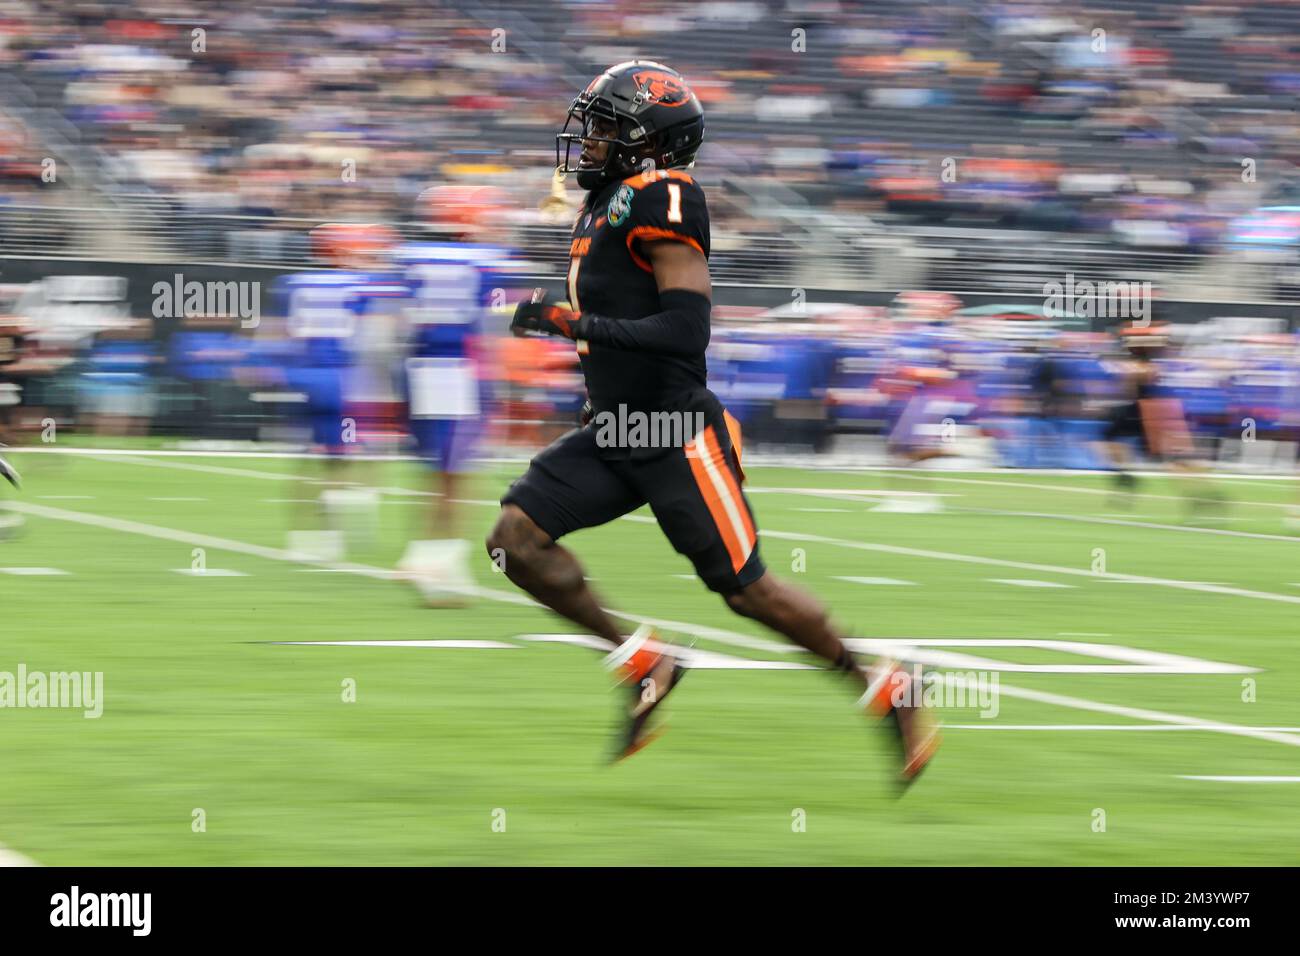 Las Vegas, NV, USA. 17th Dec, 2022. Oregon State Beavers wide receiver Tyjon Lindsey (1) streaks down the field during the first half of the SRS Distribution Las Vegas Bowl featuring the Florida Gators and the Oregon State Beavers at Allegiant Stadium in Las Vegas, NV. Christopher Trim/CSM/Alamy Live News Stock Photo